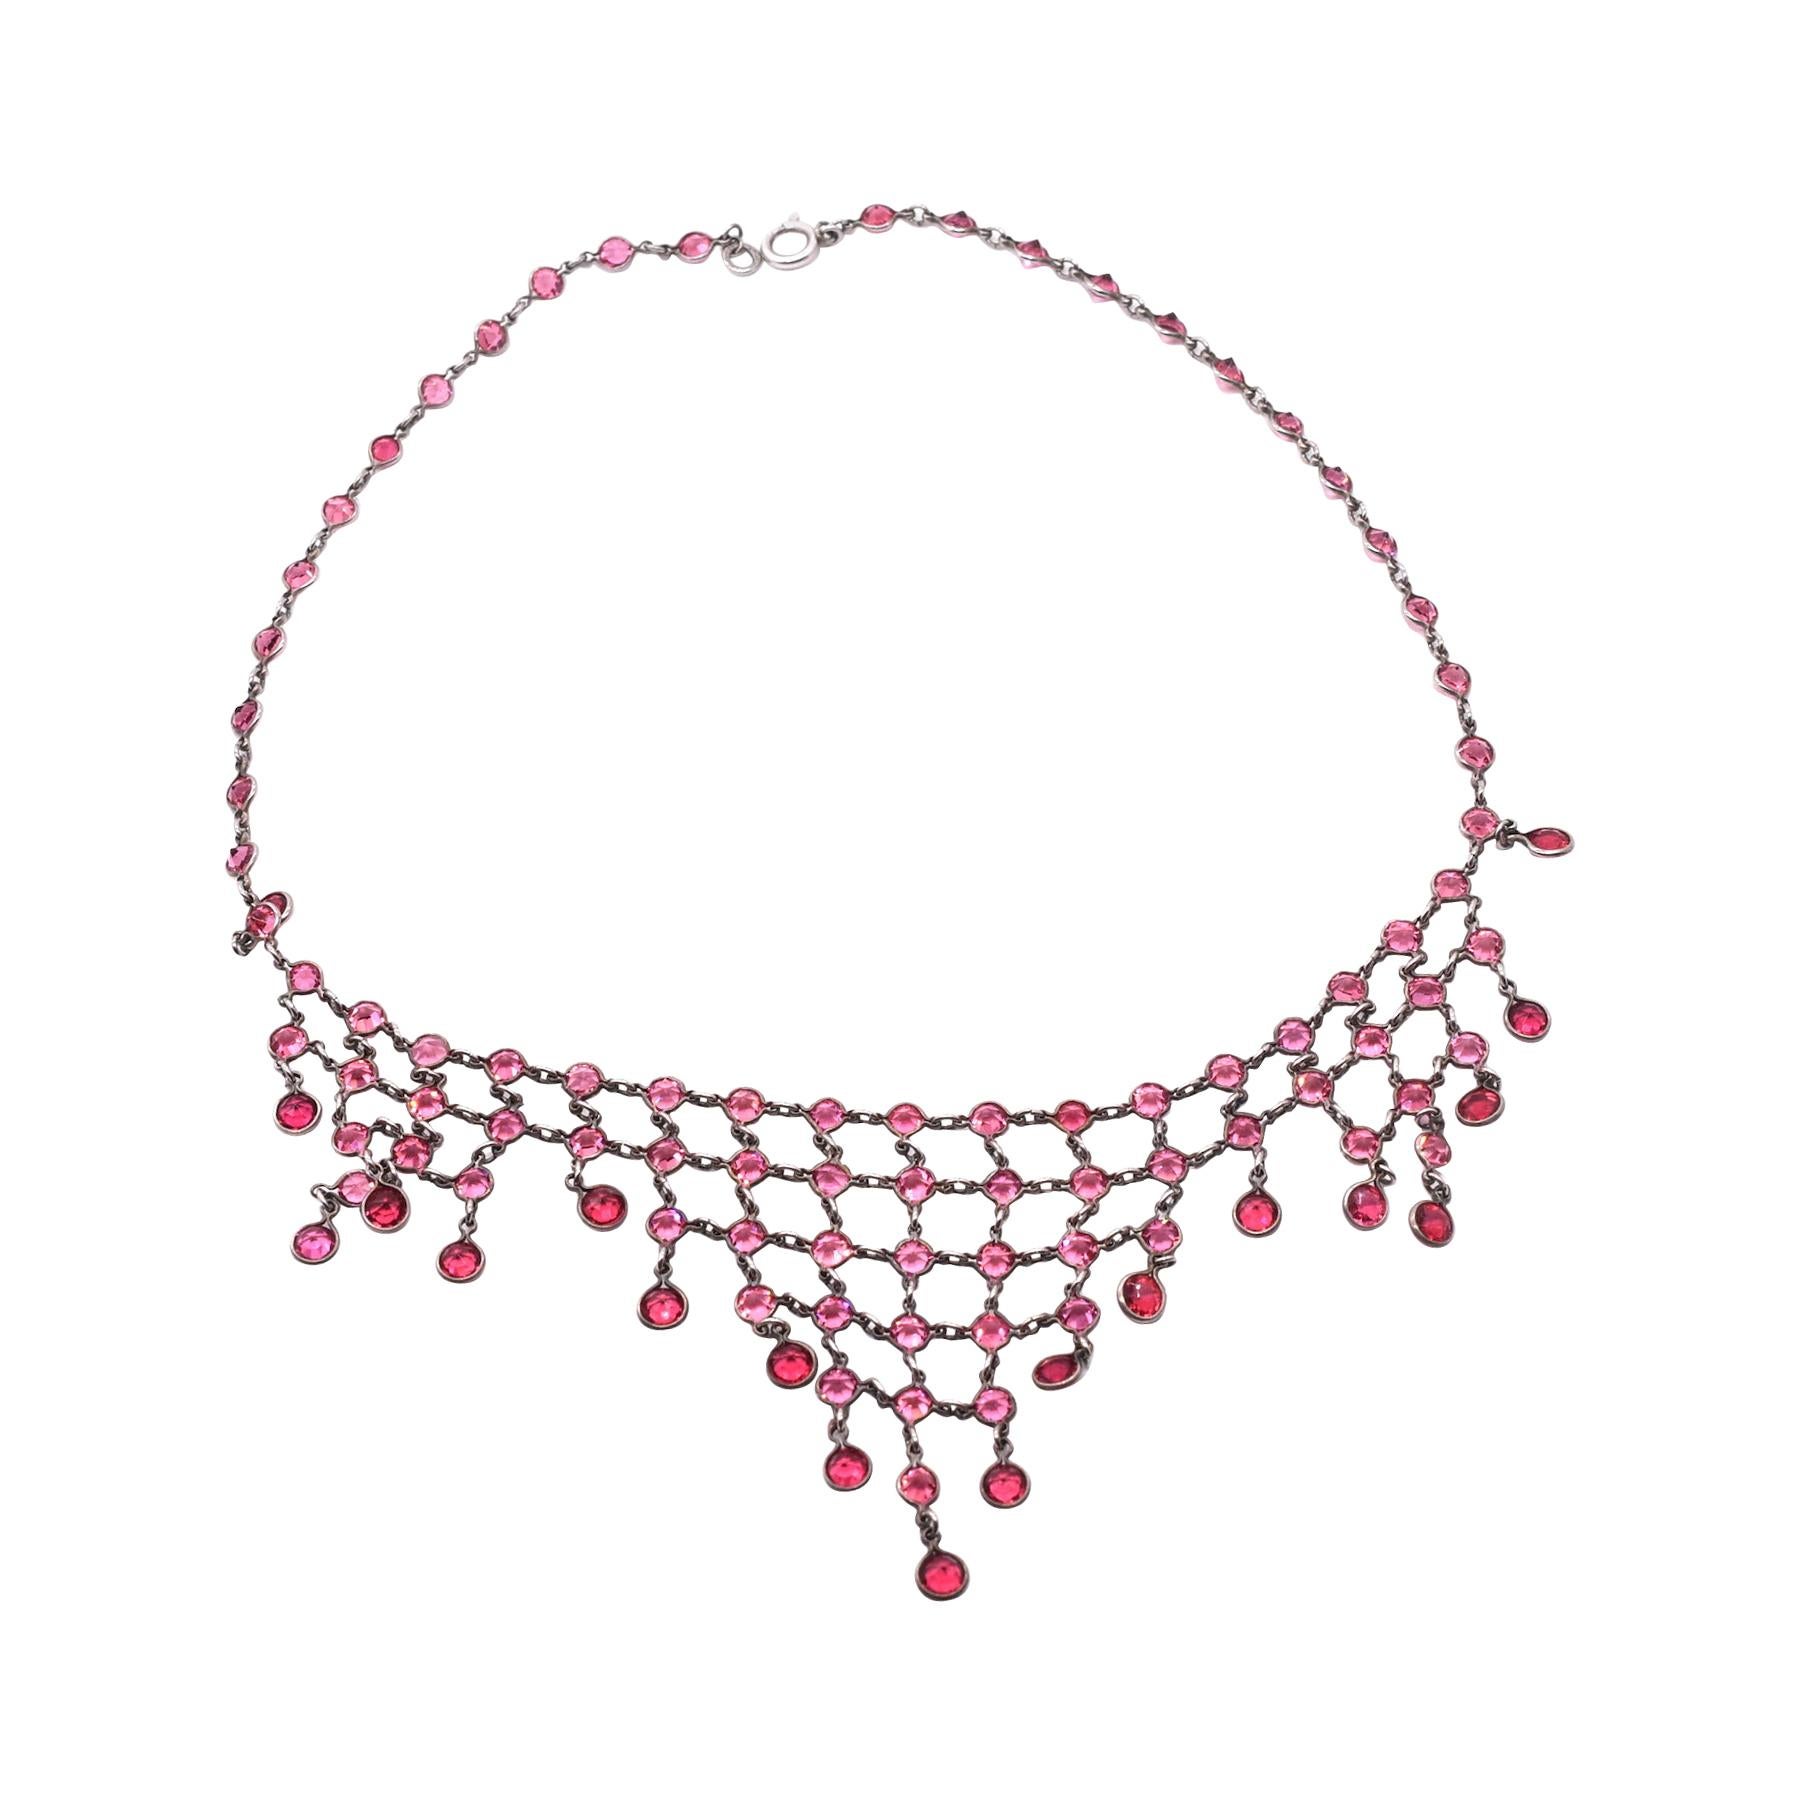 Red Paste and Metal Fringe Necklace, circa 1920